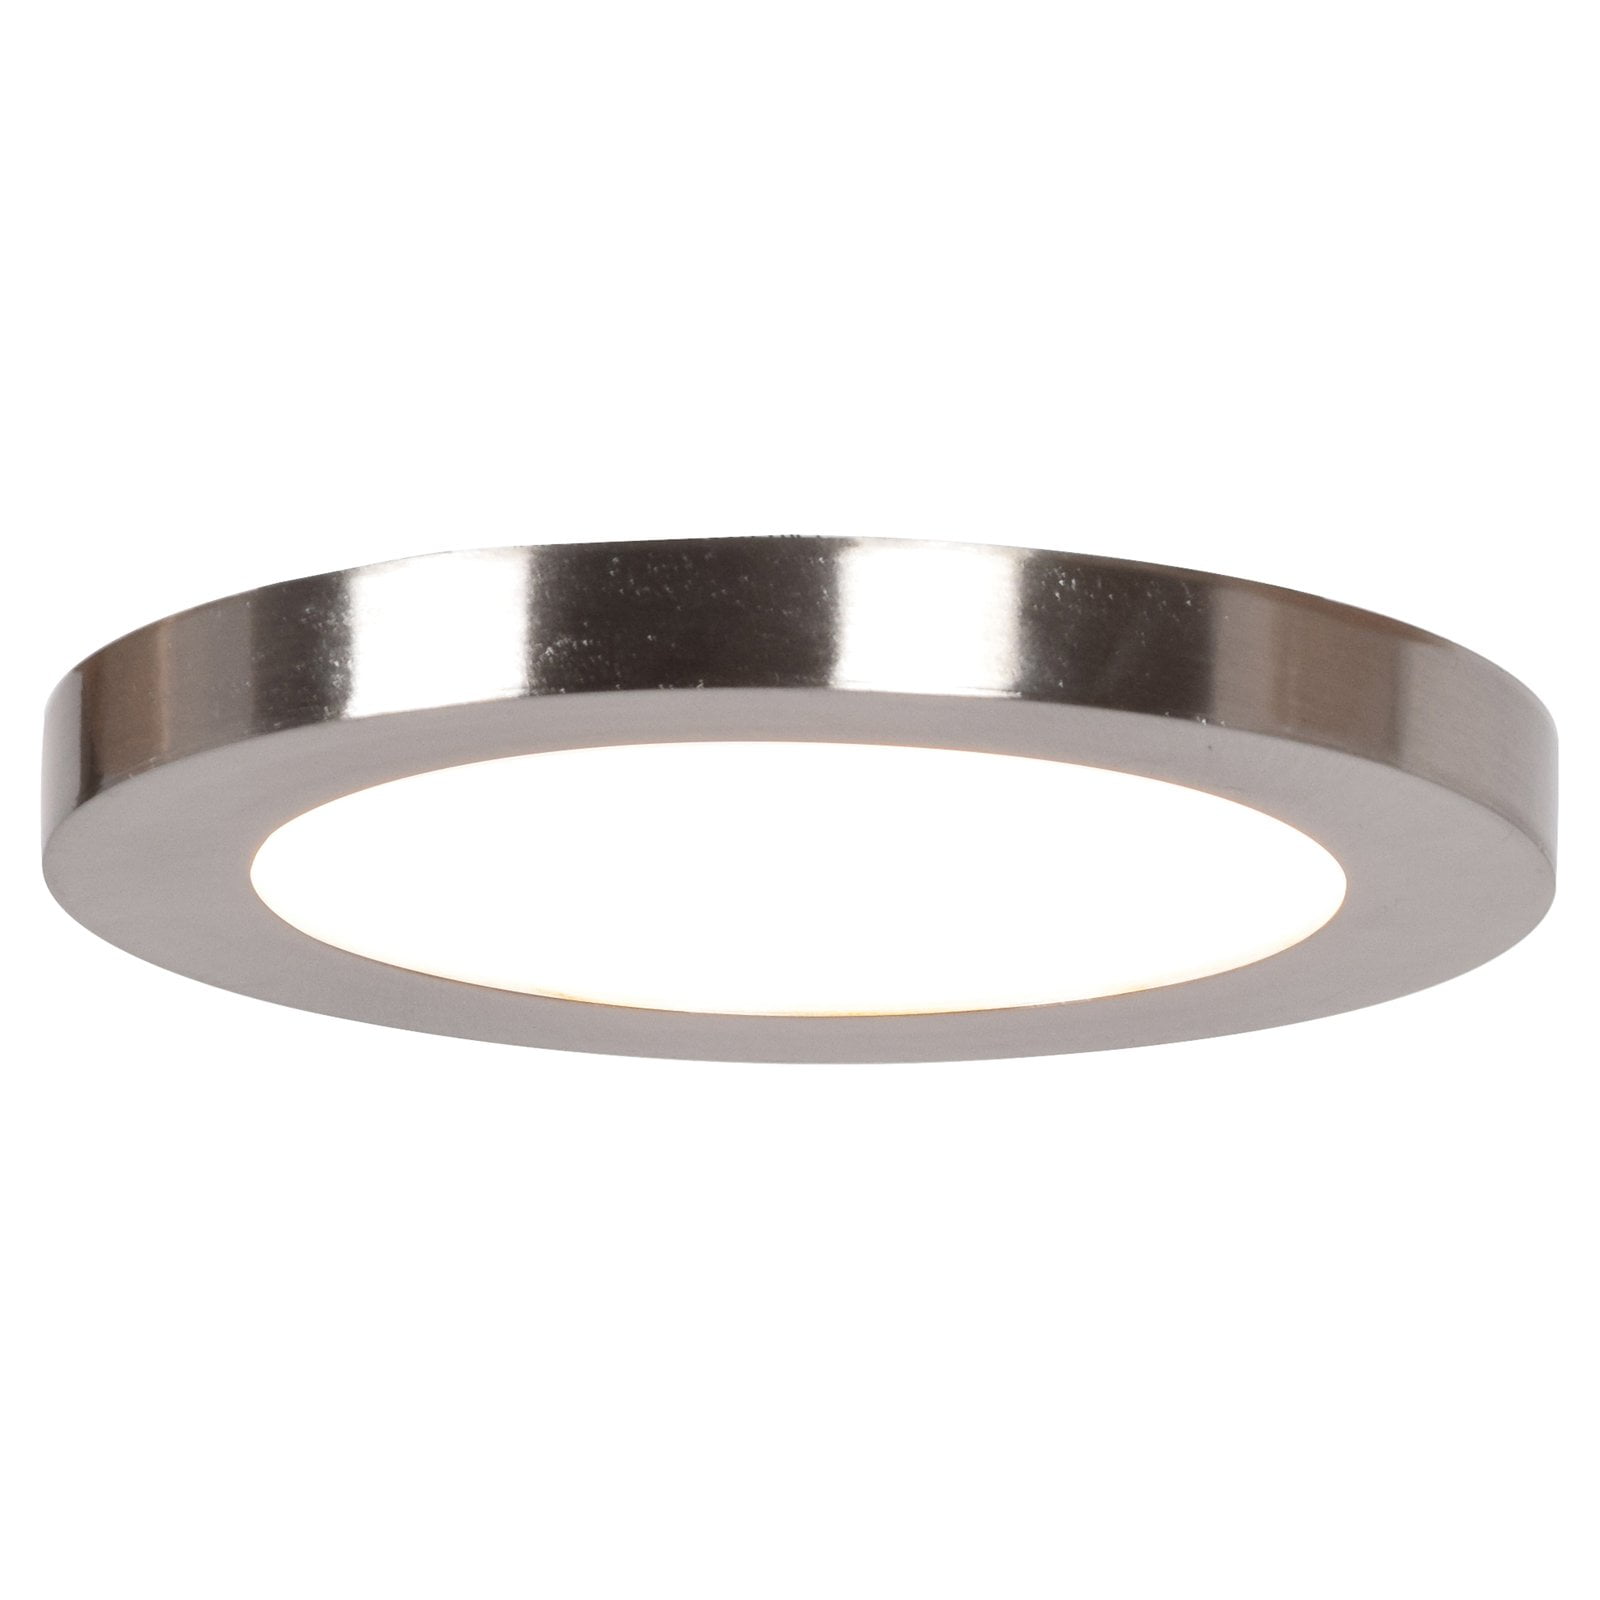 20810ledd-bs-acr 0.5 X 5.5 In. Disc Led Round Flush Mount, Brushed Steel & Acrylic Lens